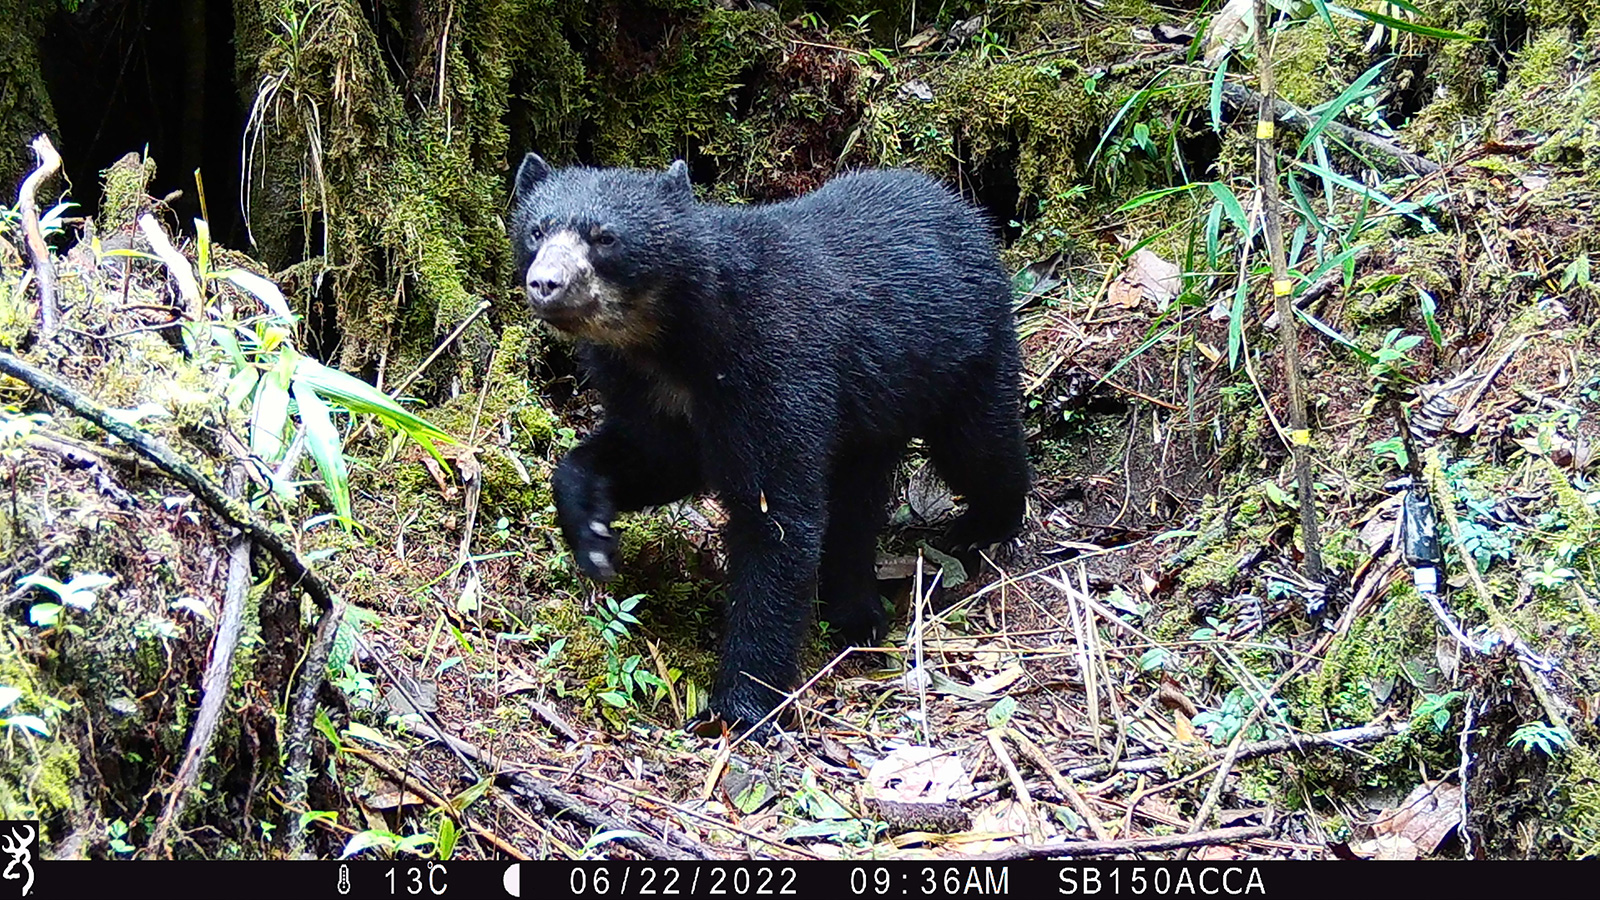 Andean bear captured in a camera trap a the Qeros-Wachiperi Conservation Concession, part of study to determine the bear’s habitat preferences. The bears altitudinal range goes from 200 to 4000 meters above sea level. Photo: Conservación Amazónica ACCA.